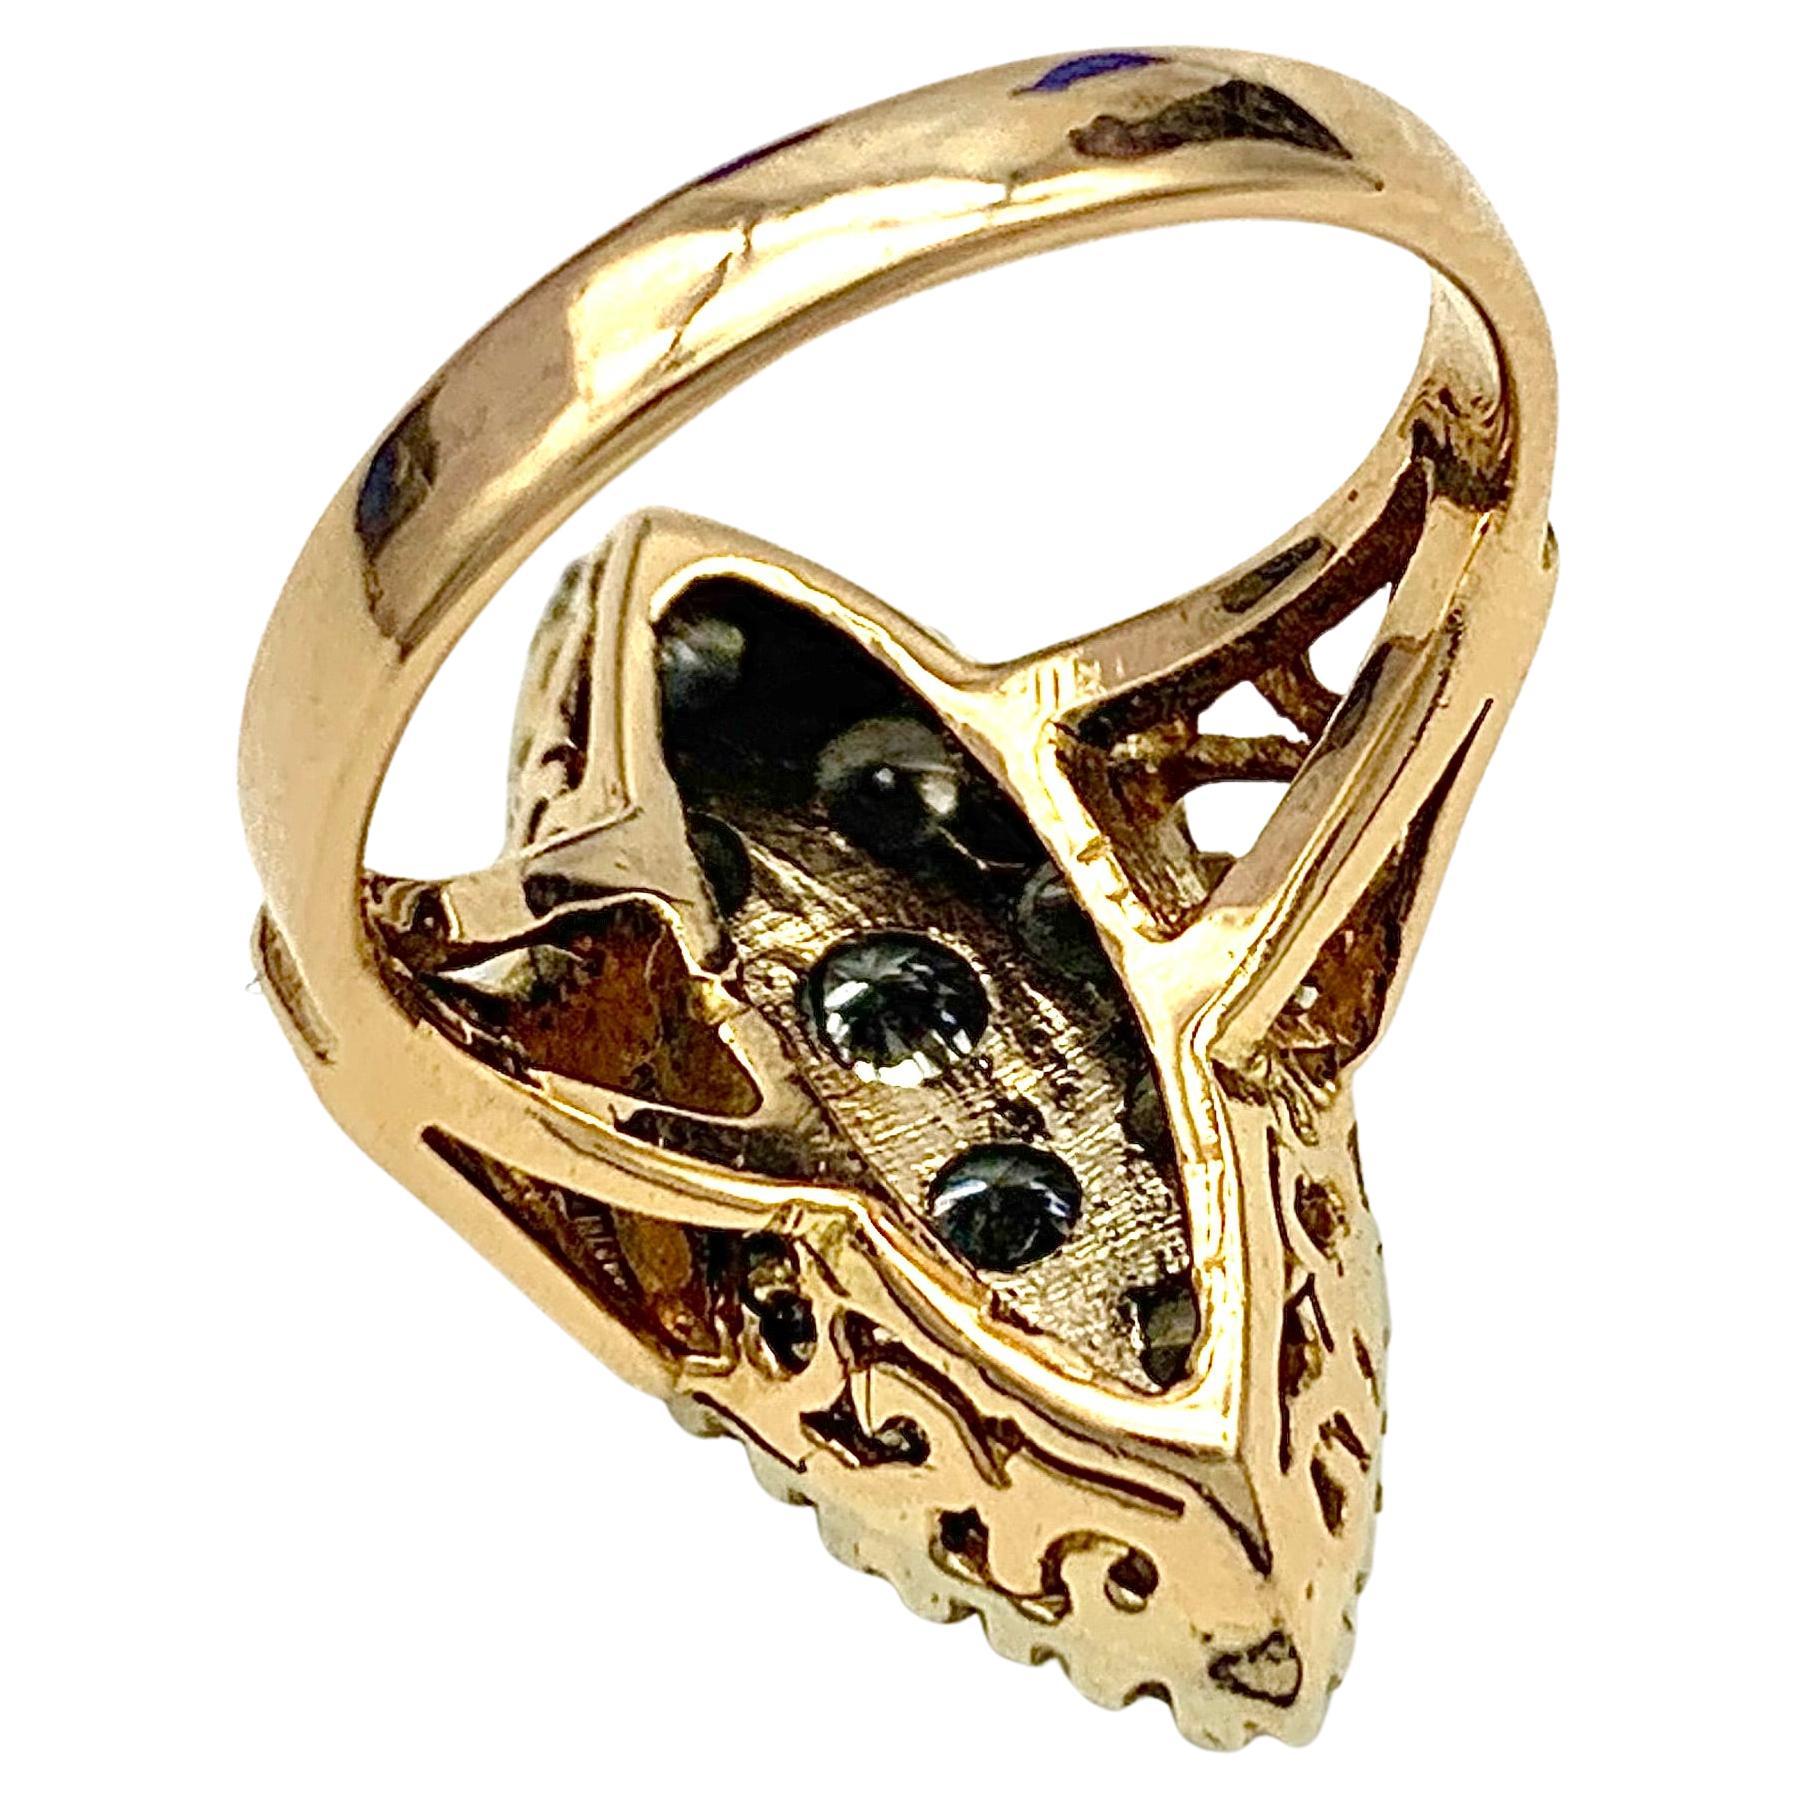 This cluster ring was made out of 18 karat red and yellow gold in the 1880's. The yellow gold ring head is set with 12 round old cut diamonds. The beautiful ring gallery has been executed in pierced work  The red gold ring shoulders have been